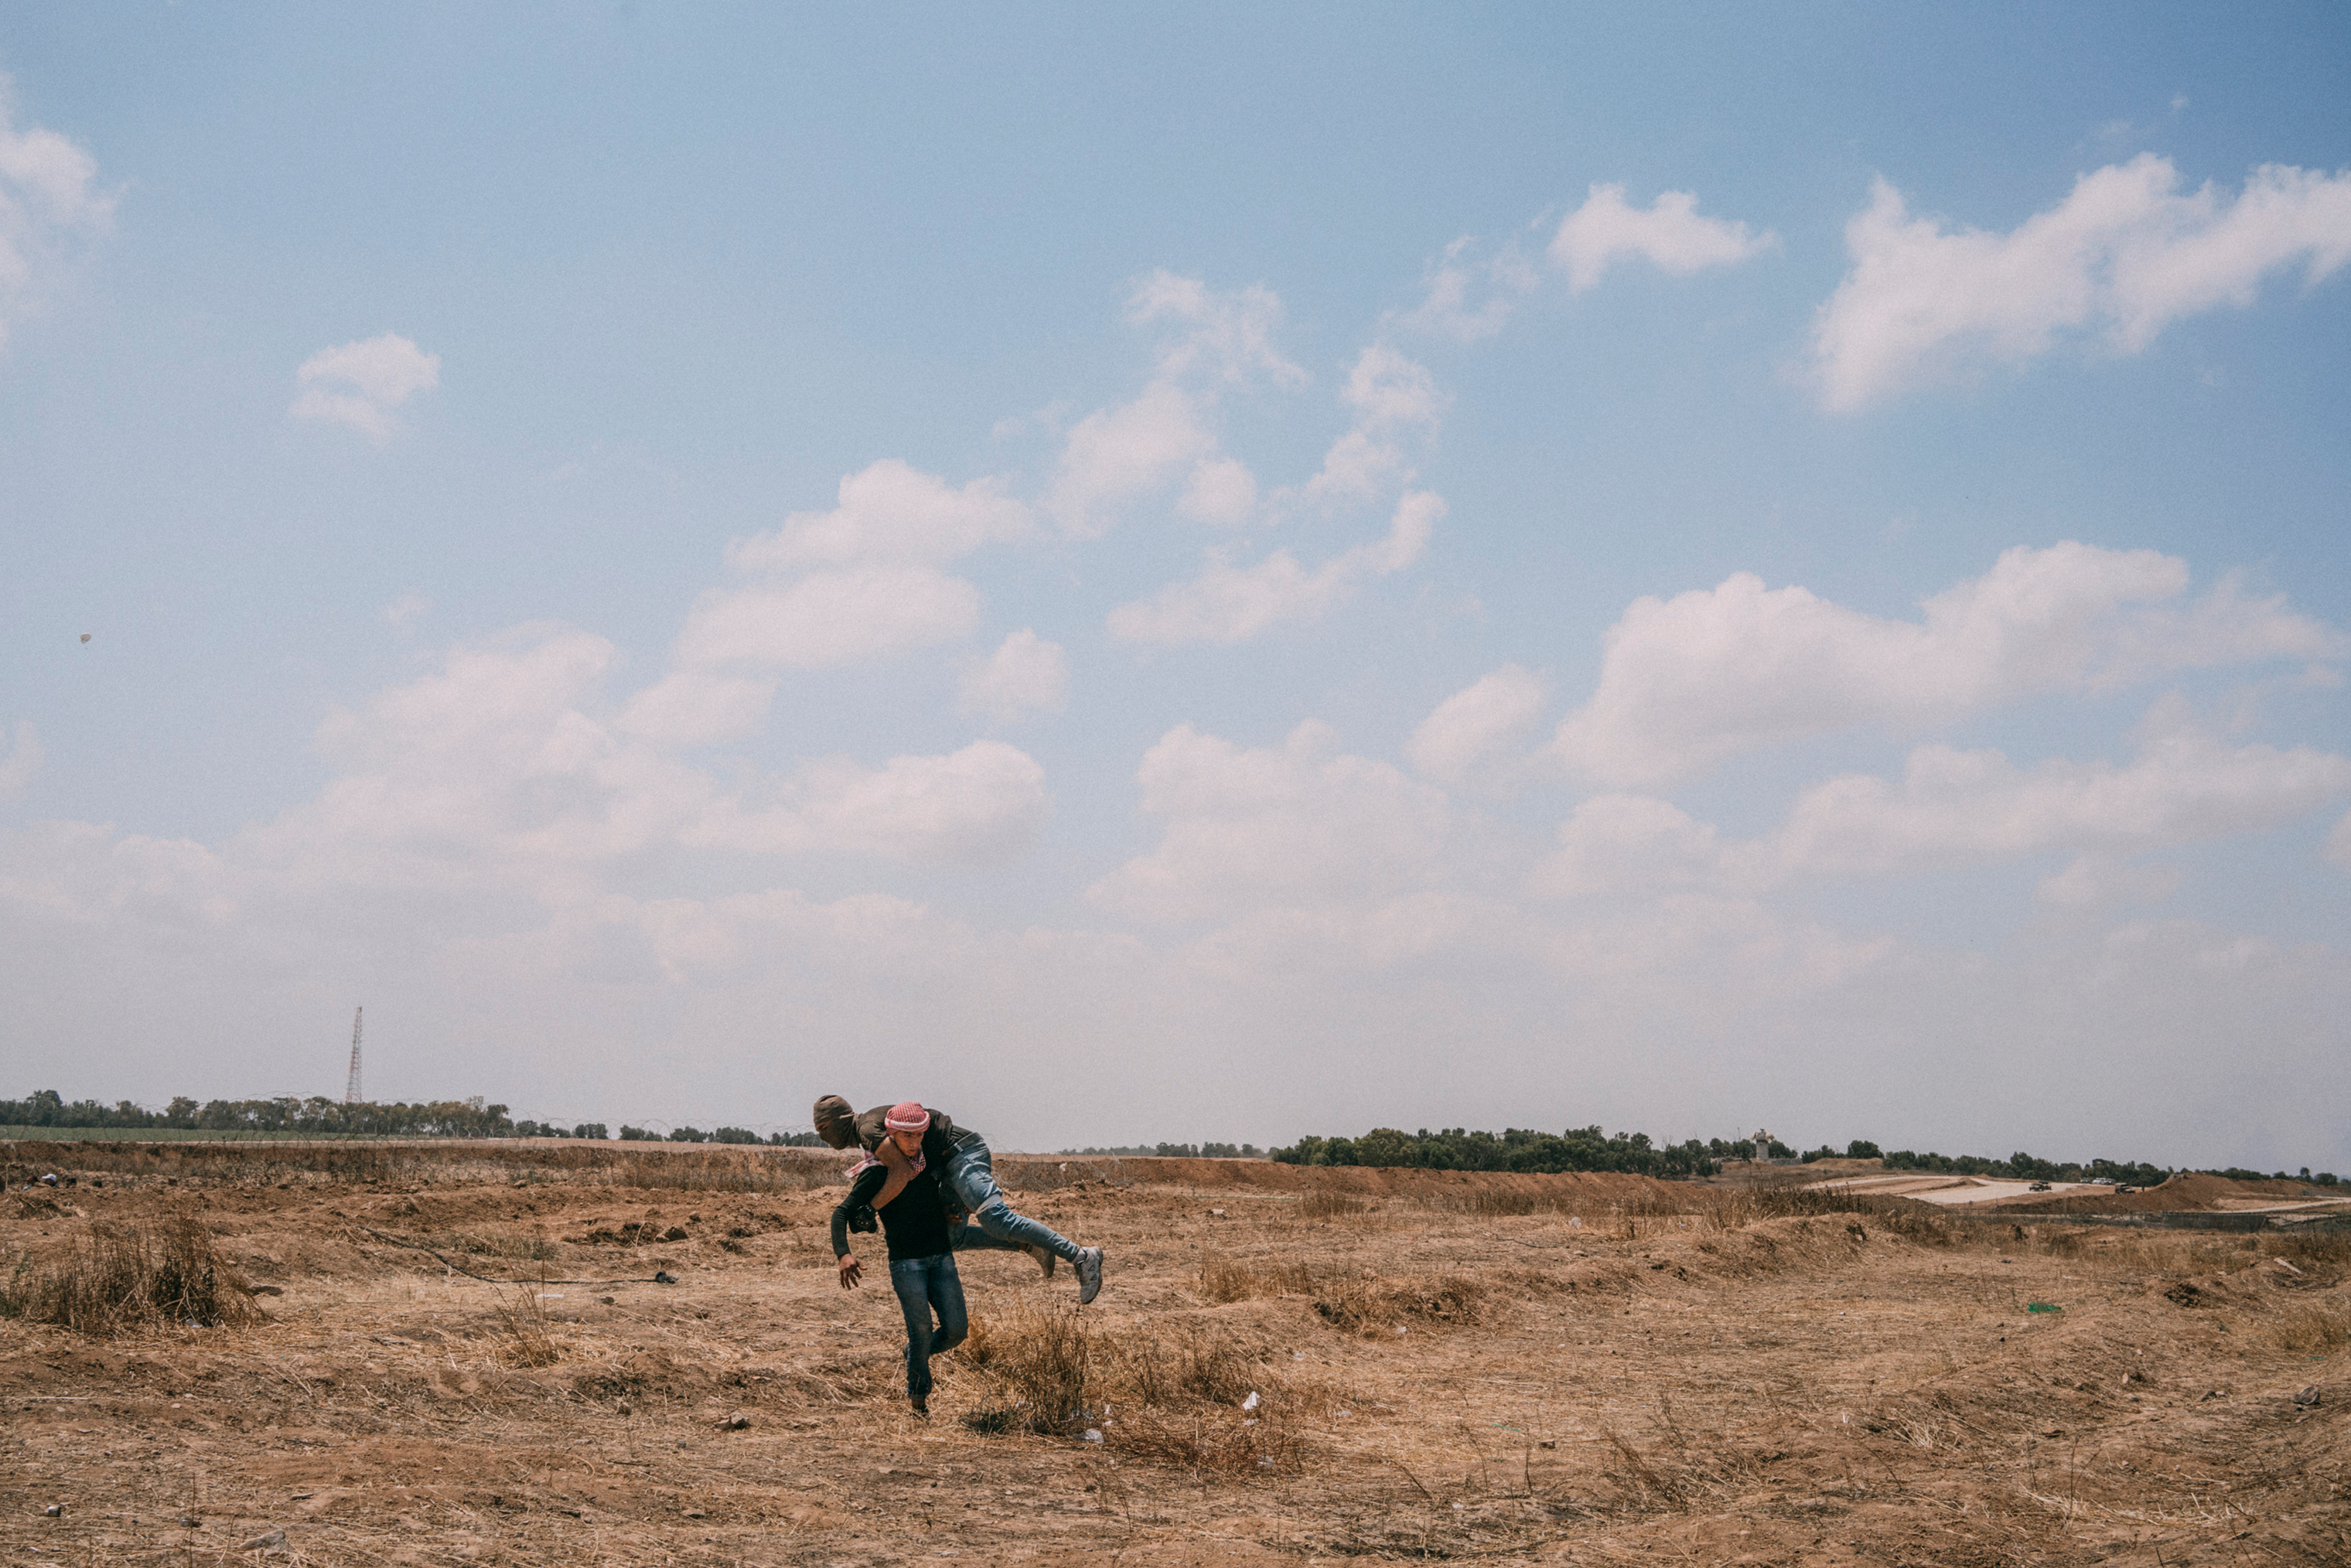 A wounded demonstrator is carried away during the protest along the Gaza-Israel border. (Emanuele Satolli for TIME)